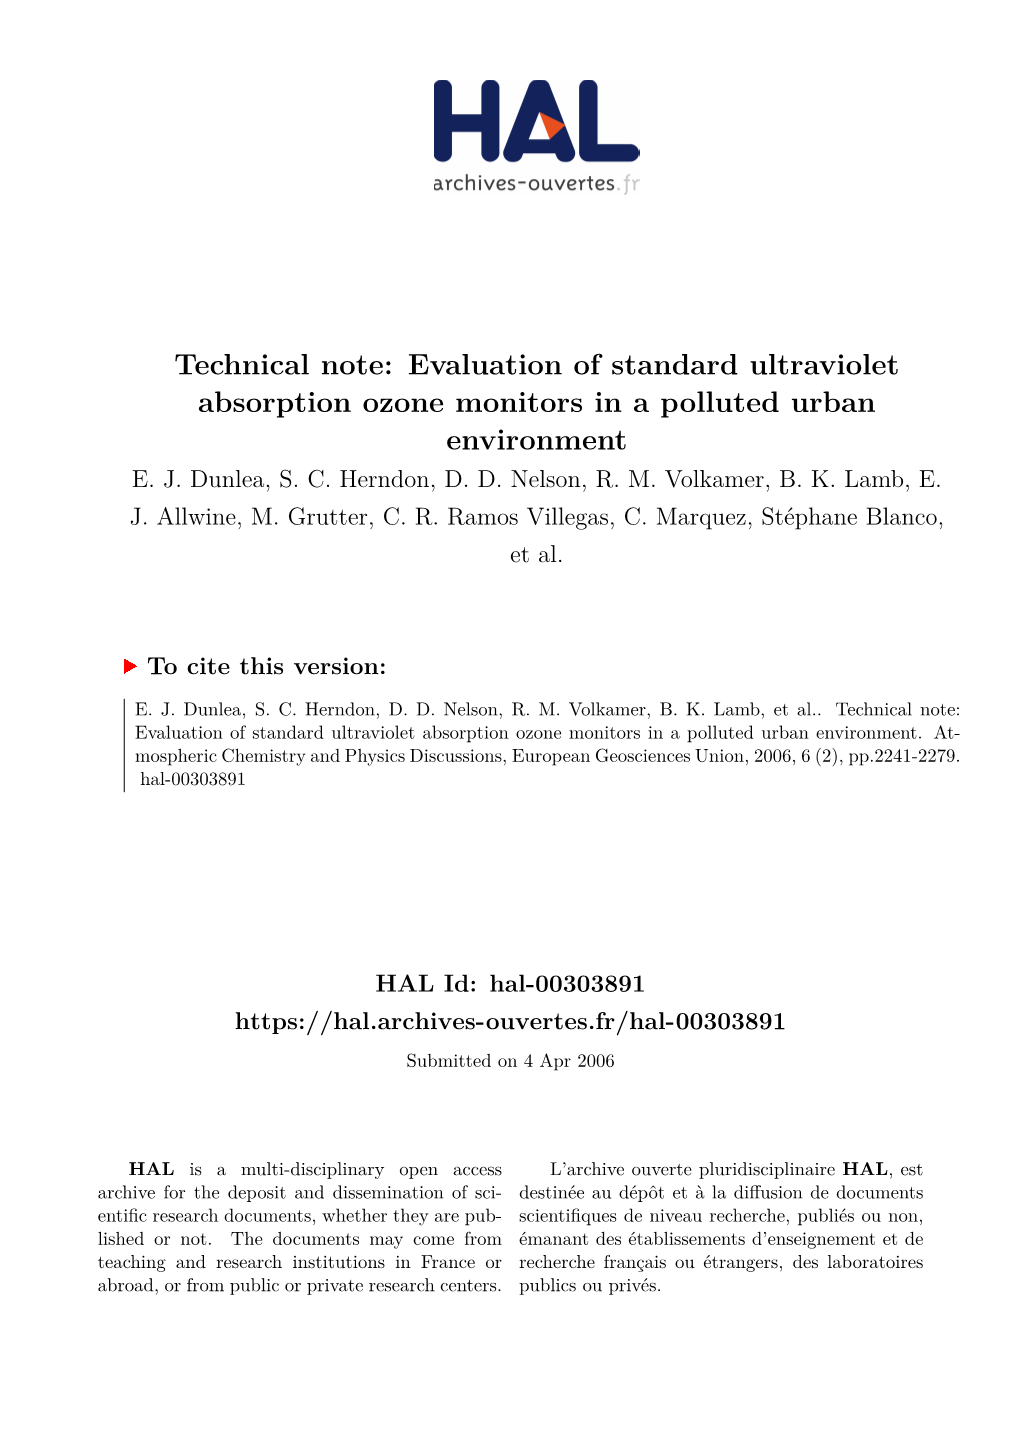 Evaluation of Standard Ultraviolet Absorption Ozone Monitors in a Polluted Urban Environment E